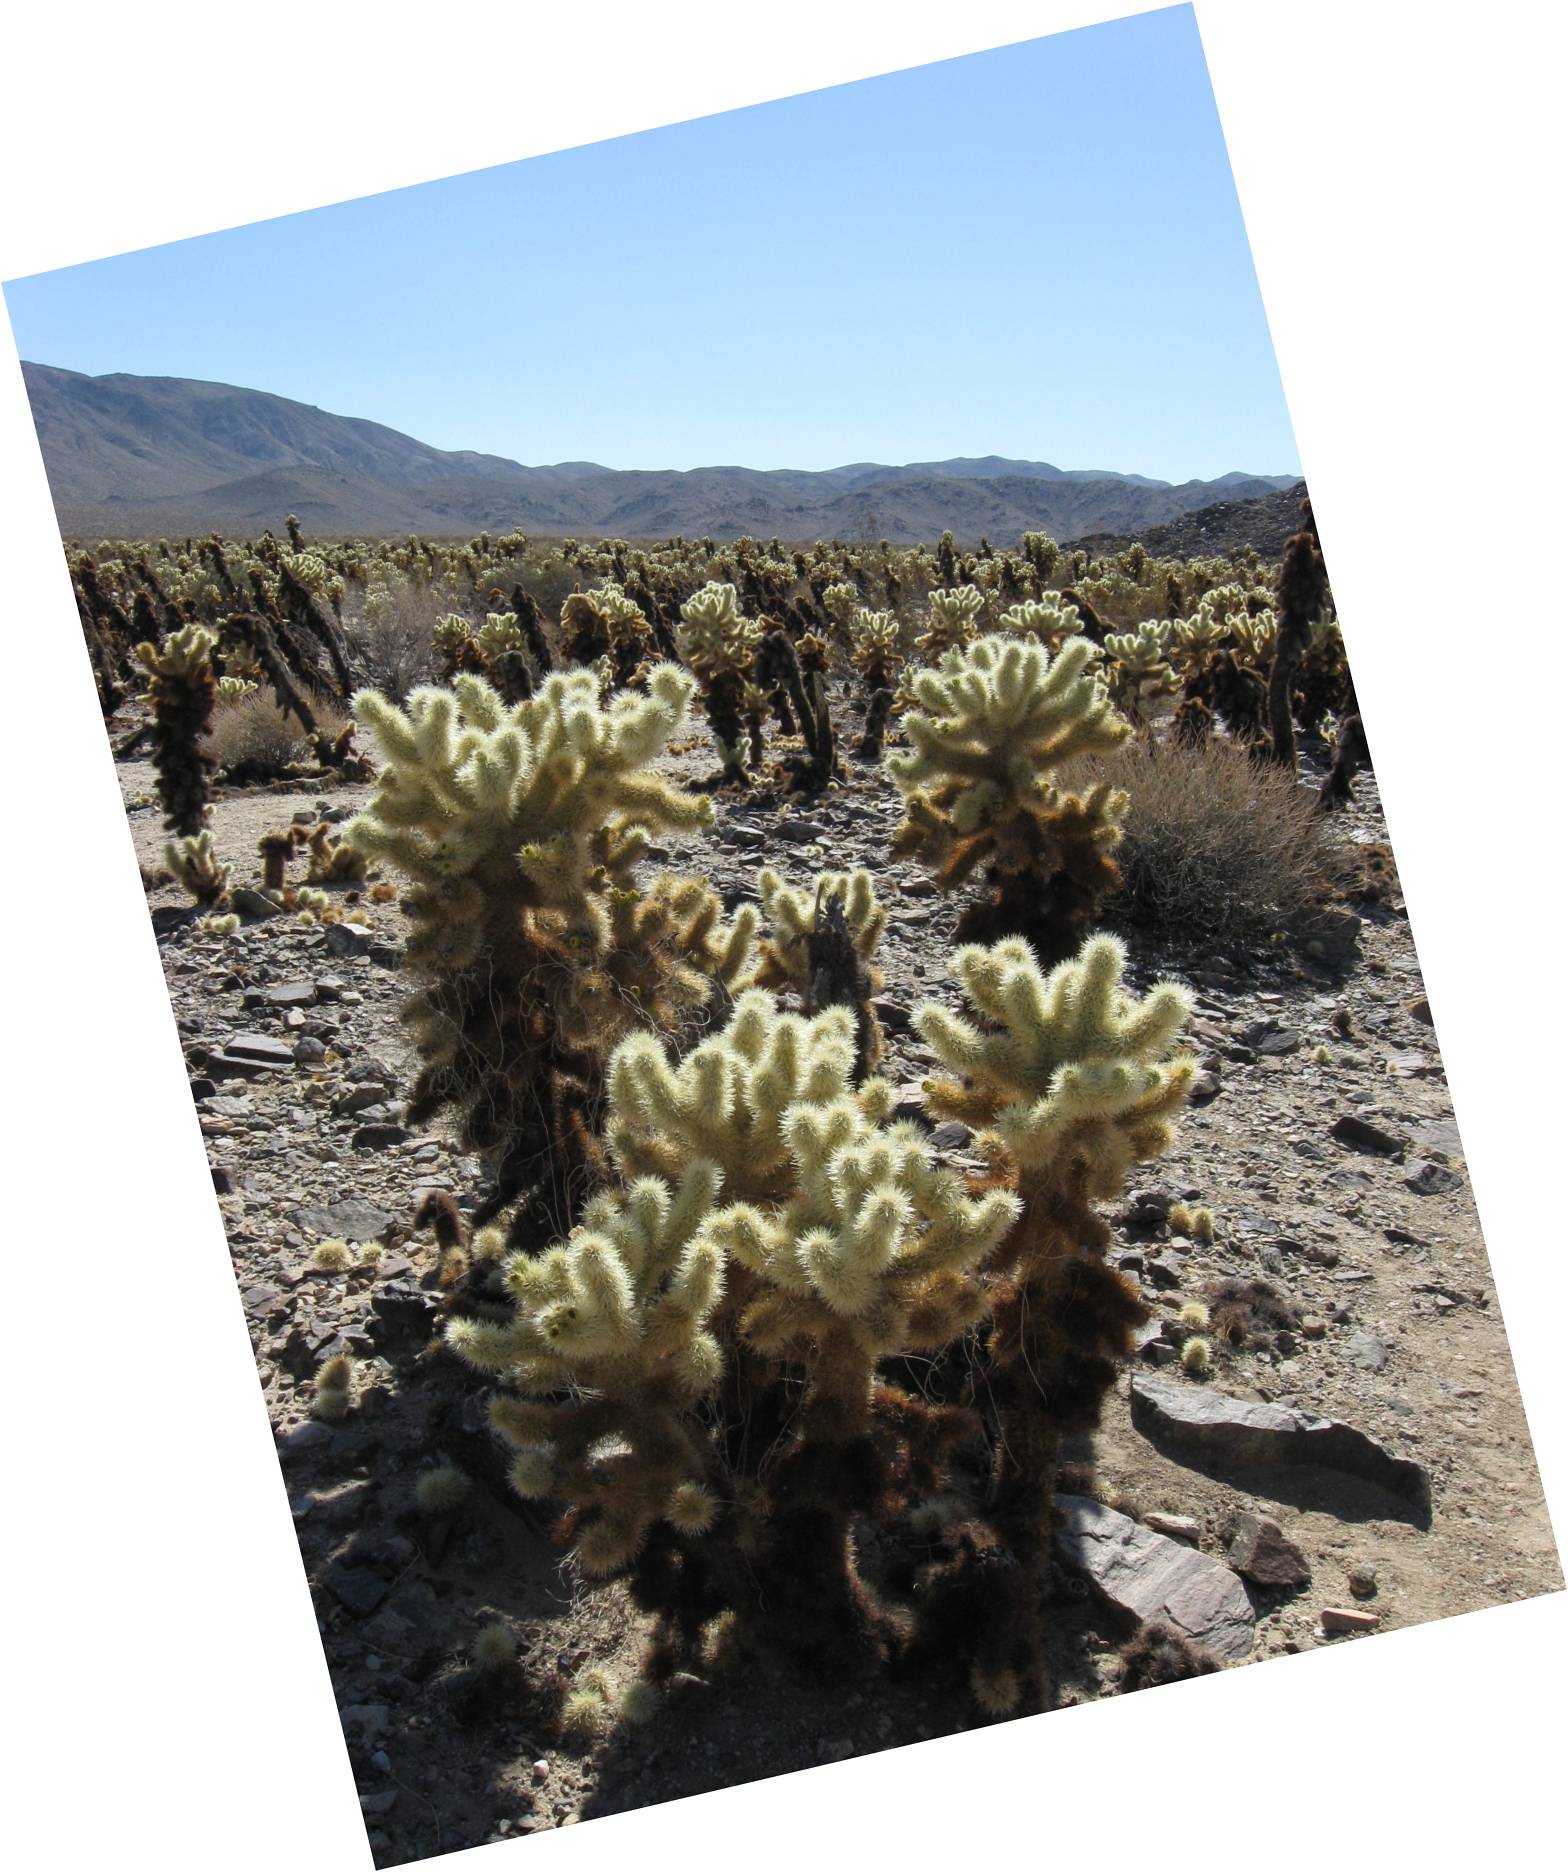 Image: The Jumping Cholla (aka the teddy bear) is prominent in the part of the national park that intersects the lower Colorado Desert